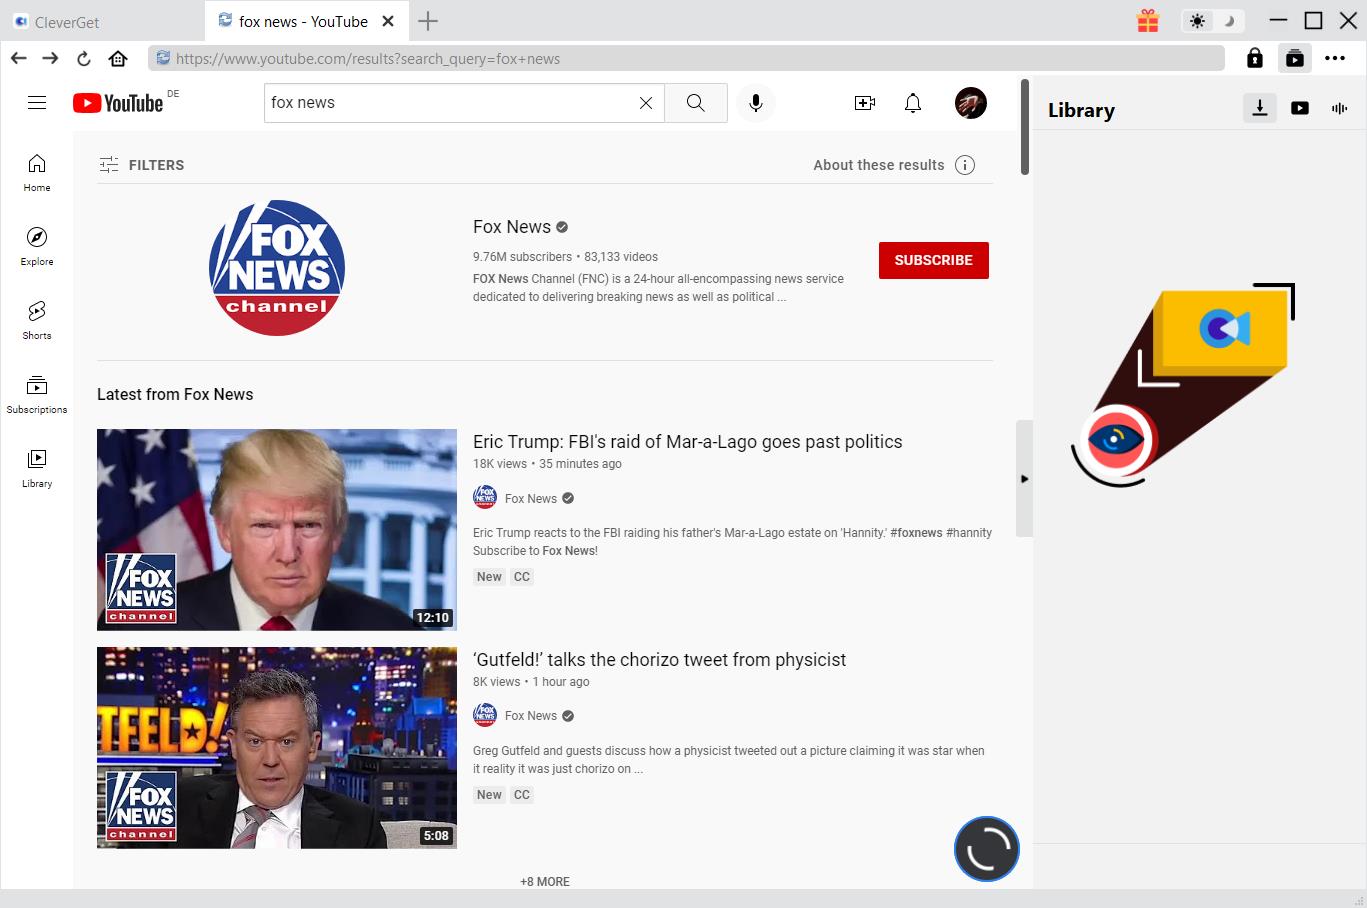 how-to-download-fox-news-videos-with-cleverget-1